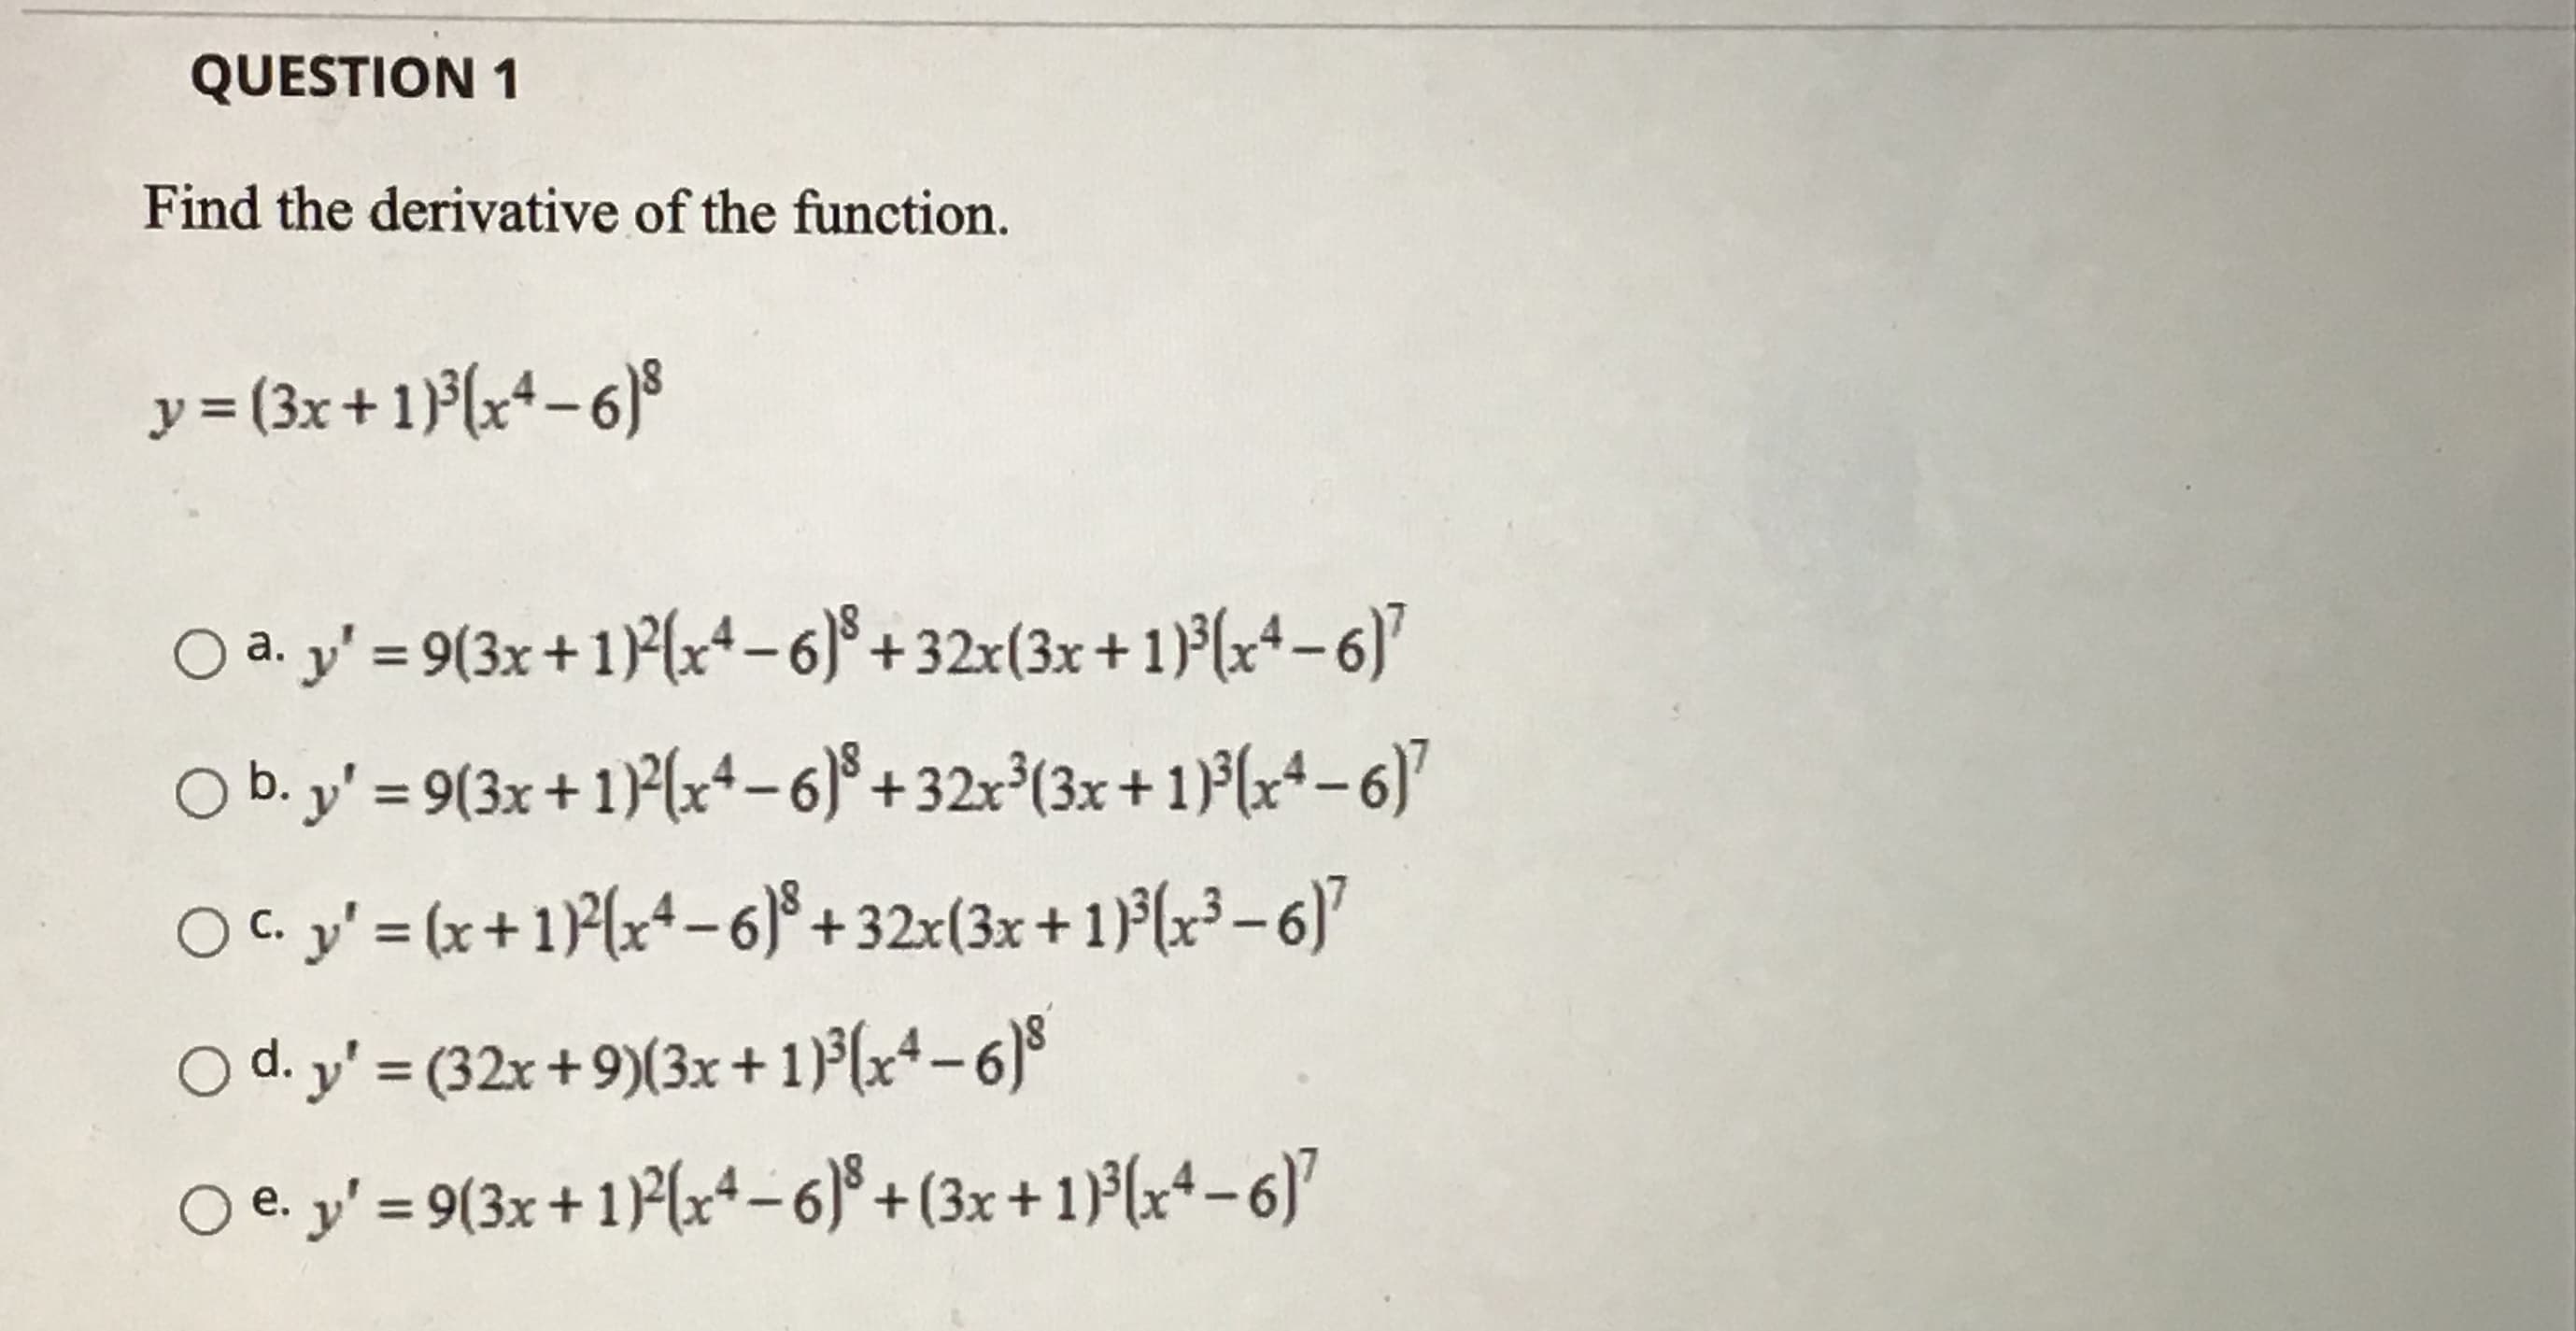 Find the derivative of the function.
y = (3x+1)(x*-6)s
O a. y' = 9(3x+1)2(x+-6)°+32x(3x+1}³(x4-6)
а.
%3D
O b. y' = 9(3x+1)²(x+-6)° + 32x³(3x+1)°(x+ 6)"
O C. y' = (x +1)P(x*-6)° + 32x(3x+1)³(x³-6)"
С.
O d. y' = (32x +9)(3x+ 1)(x*-6)%
O e. y' = 9(3x+1)P(x+-6)° + (3x +1)³(x+-6)'
е.
